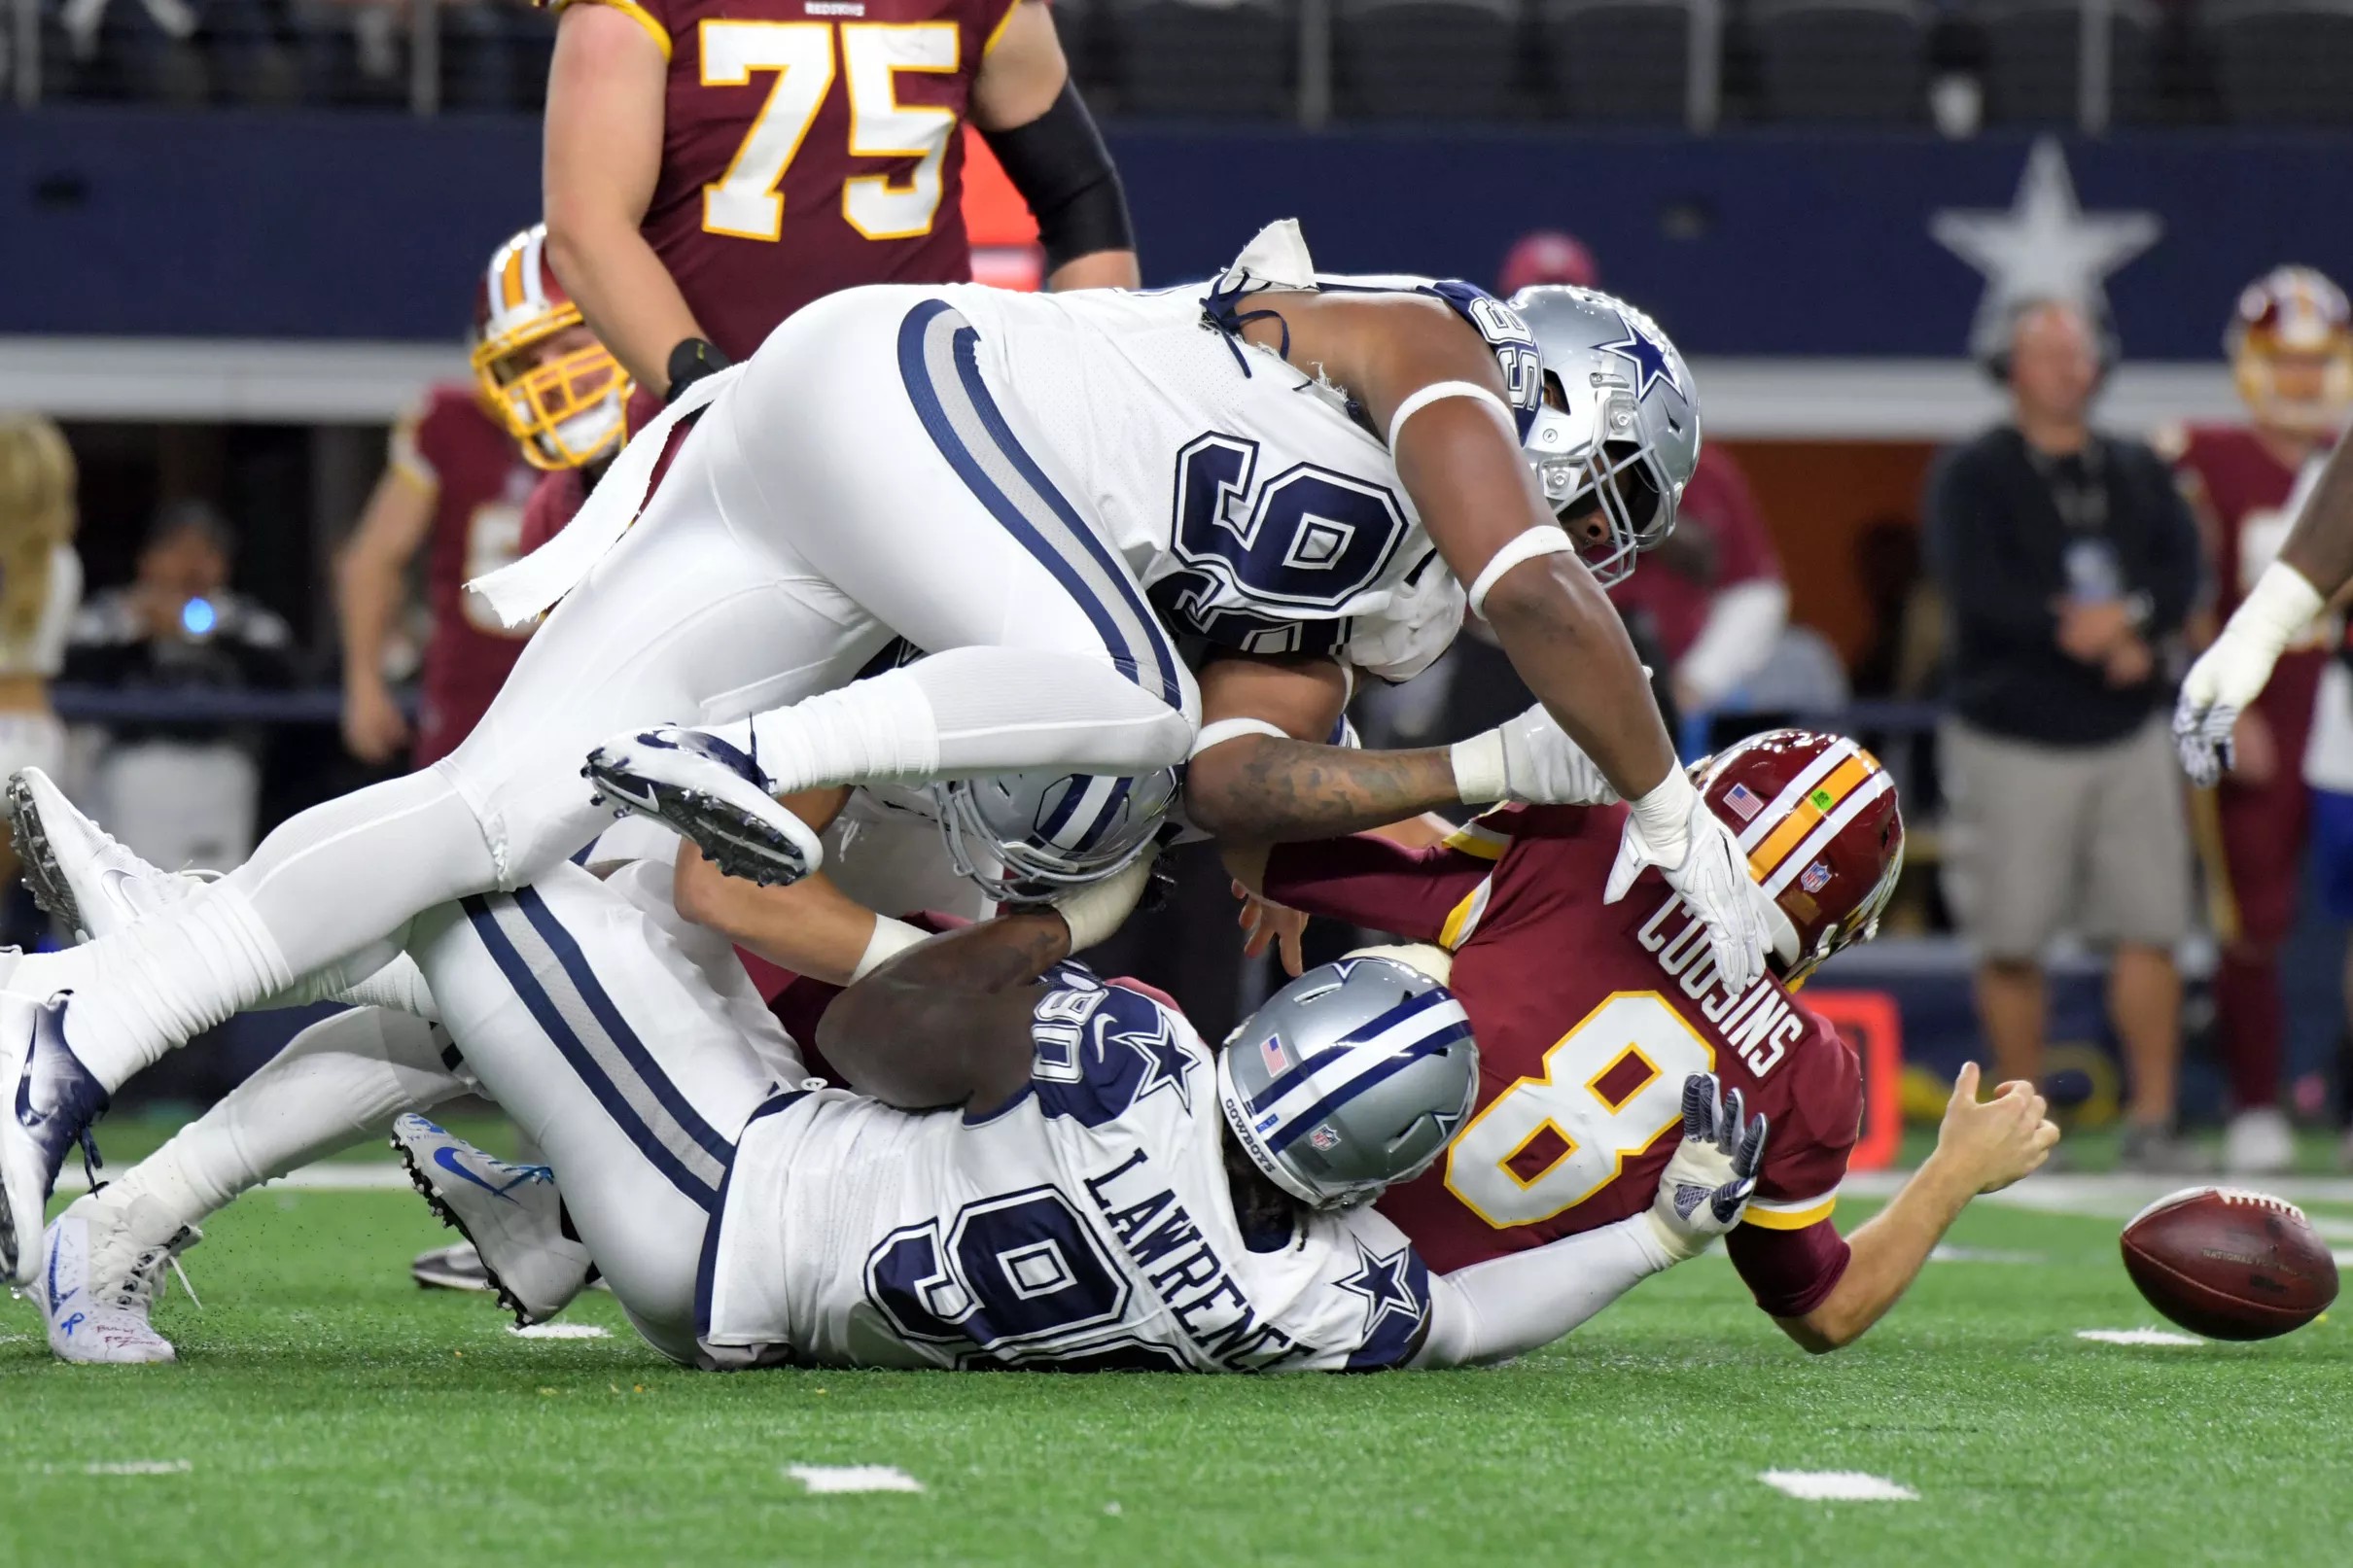 Cowboys vs. Redskins Game Ball Defense and special teams dominate on TNF